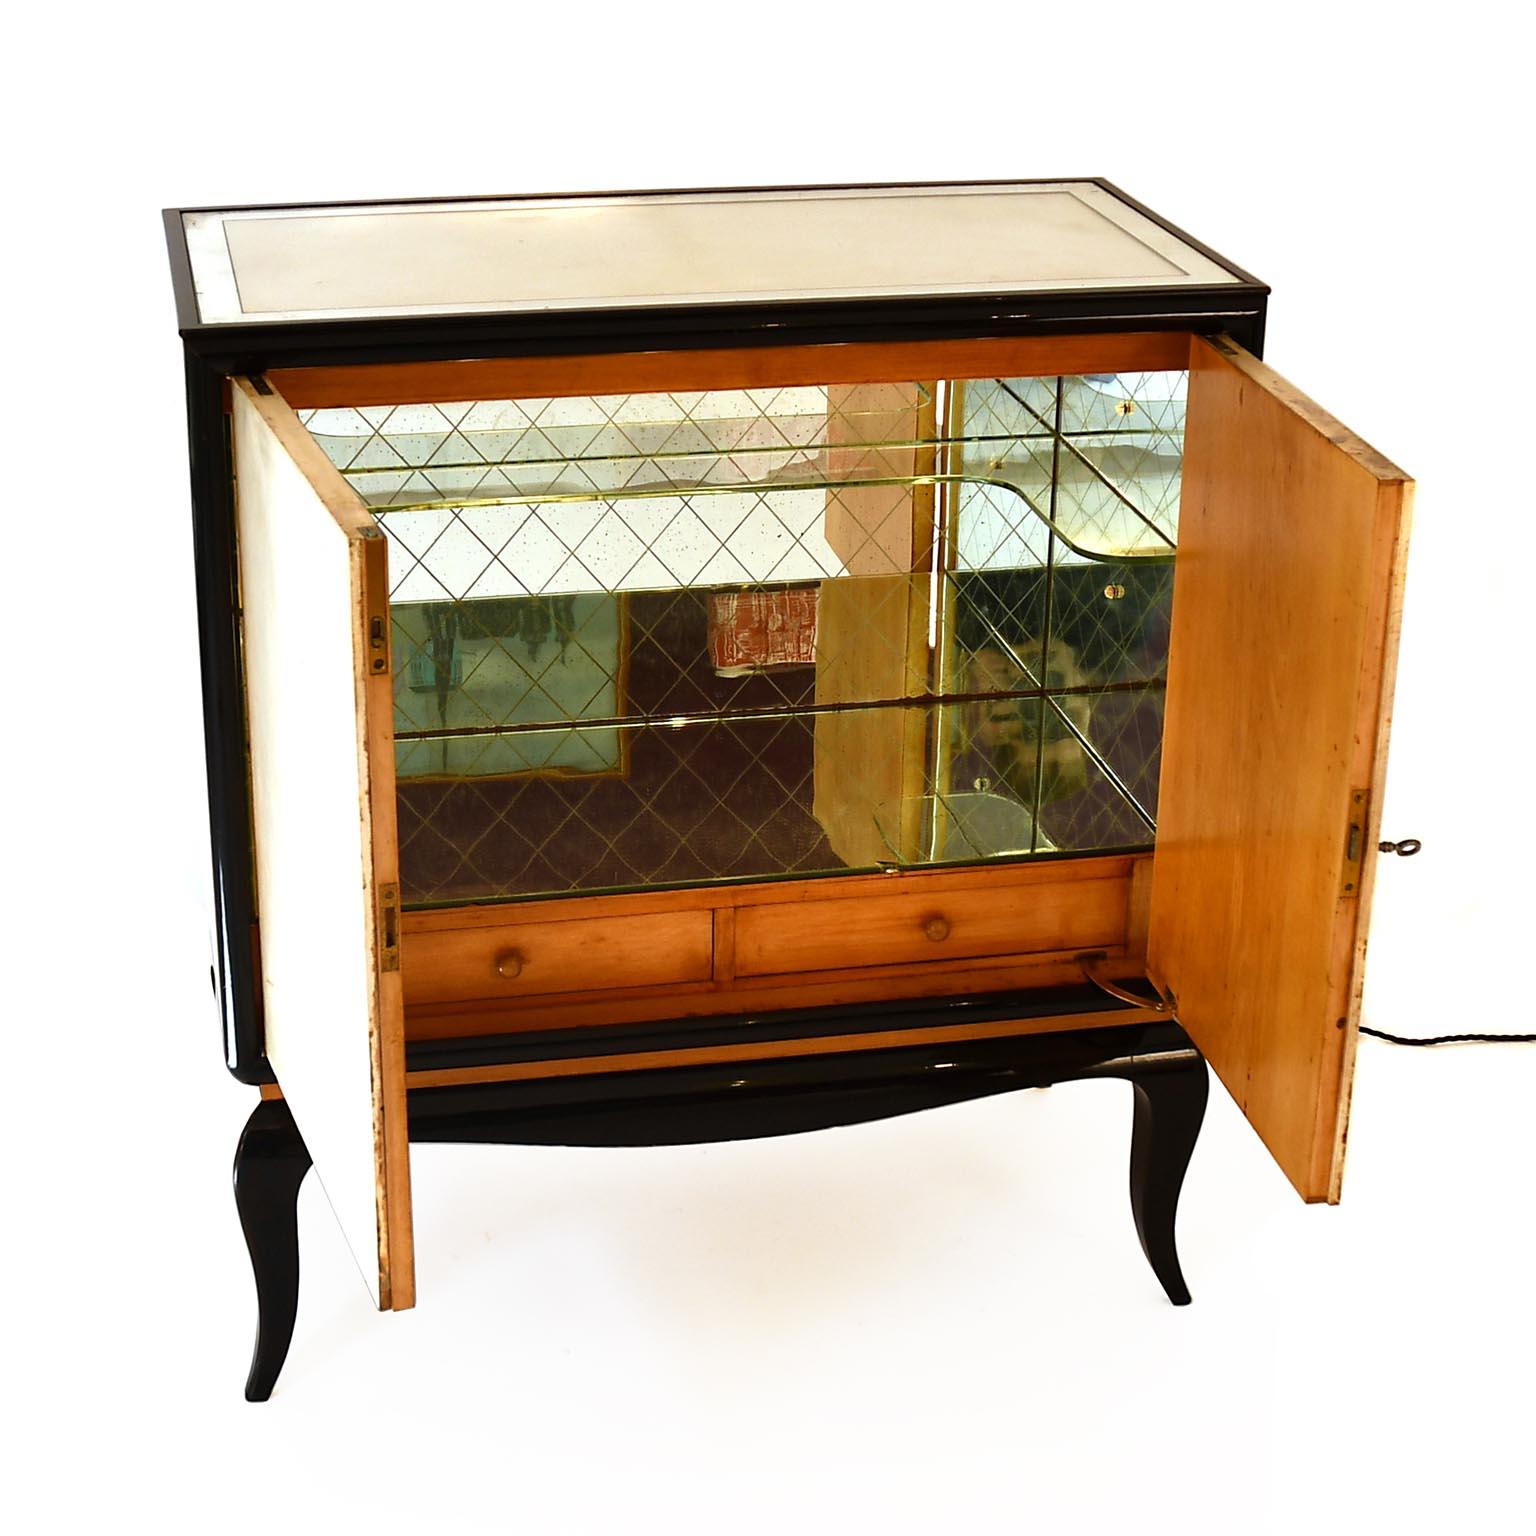 Art Deco glass bar cabinet in the style of Osvaldo Borsani. 
Hardwood legs dyed to rosewood. All glass parts are in original condition. The first 3 centimetres of the edge of the glass top are mirrored. The glass plates inside are mirrored and have